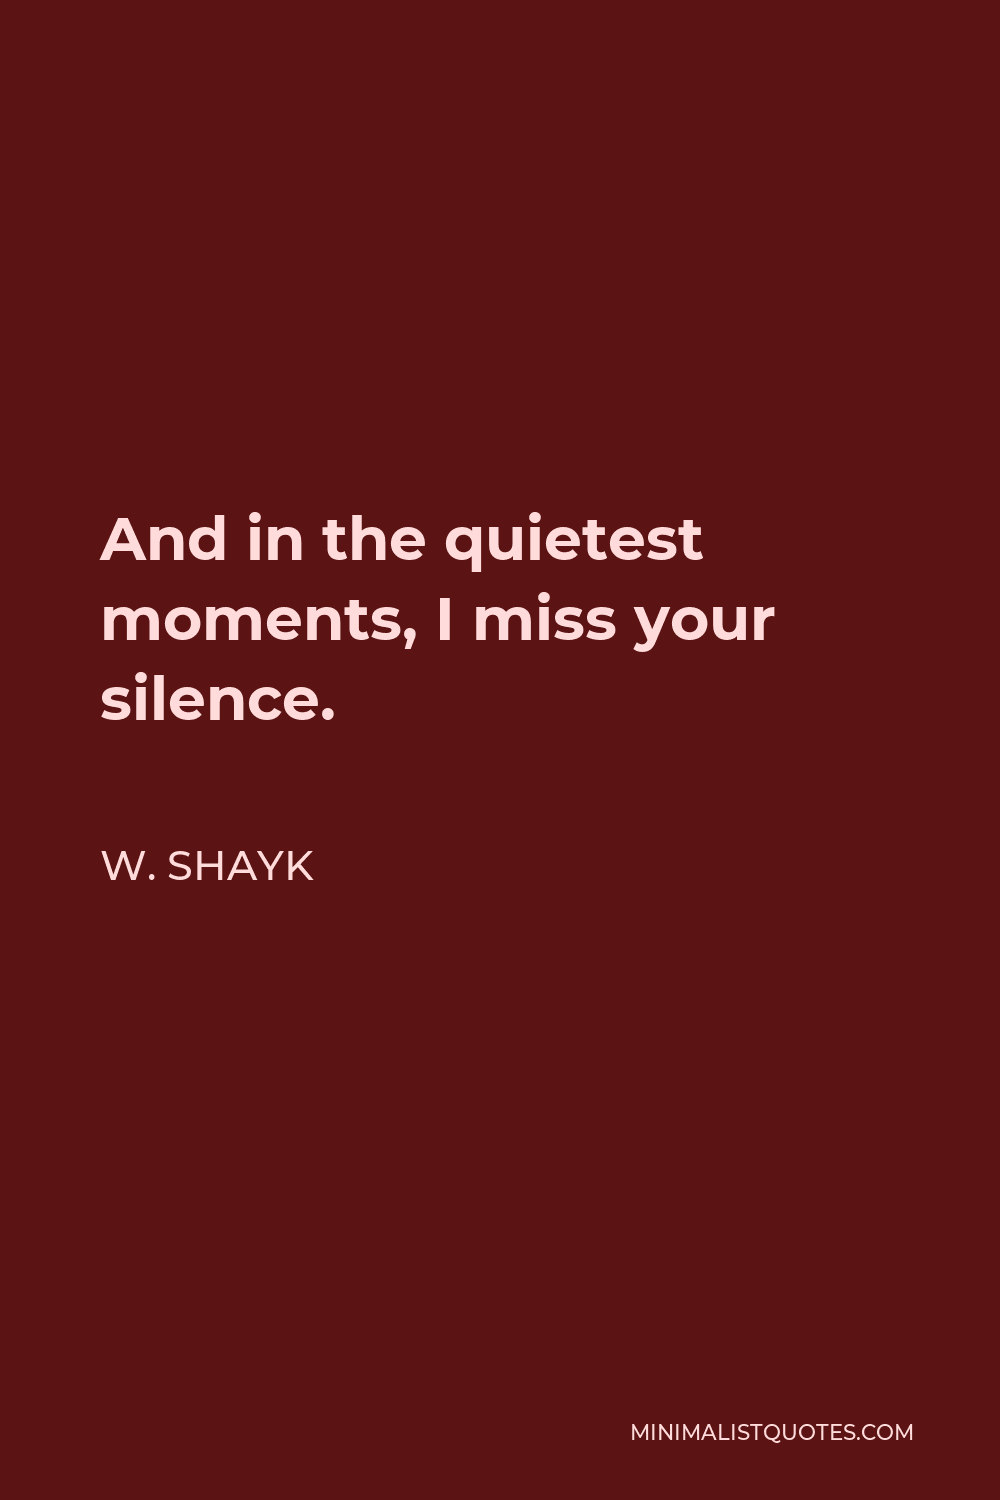 W. Shayk Quote - And in the quietest moments, I miss your silence.